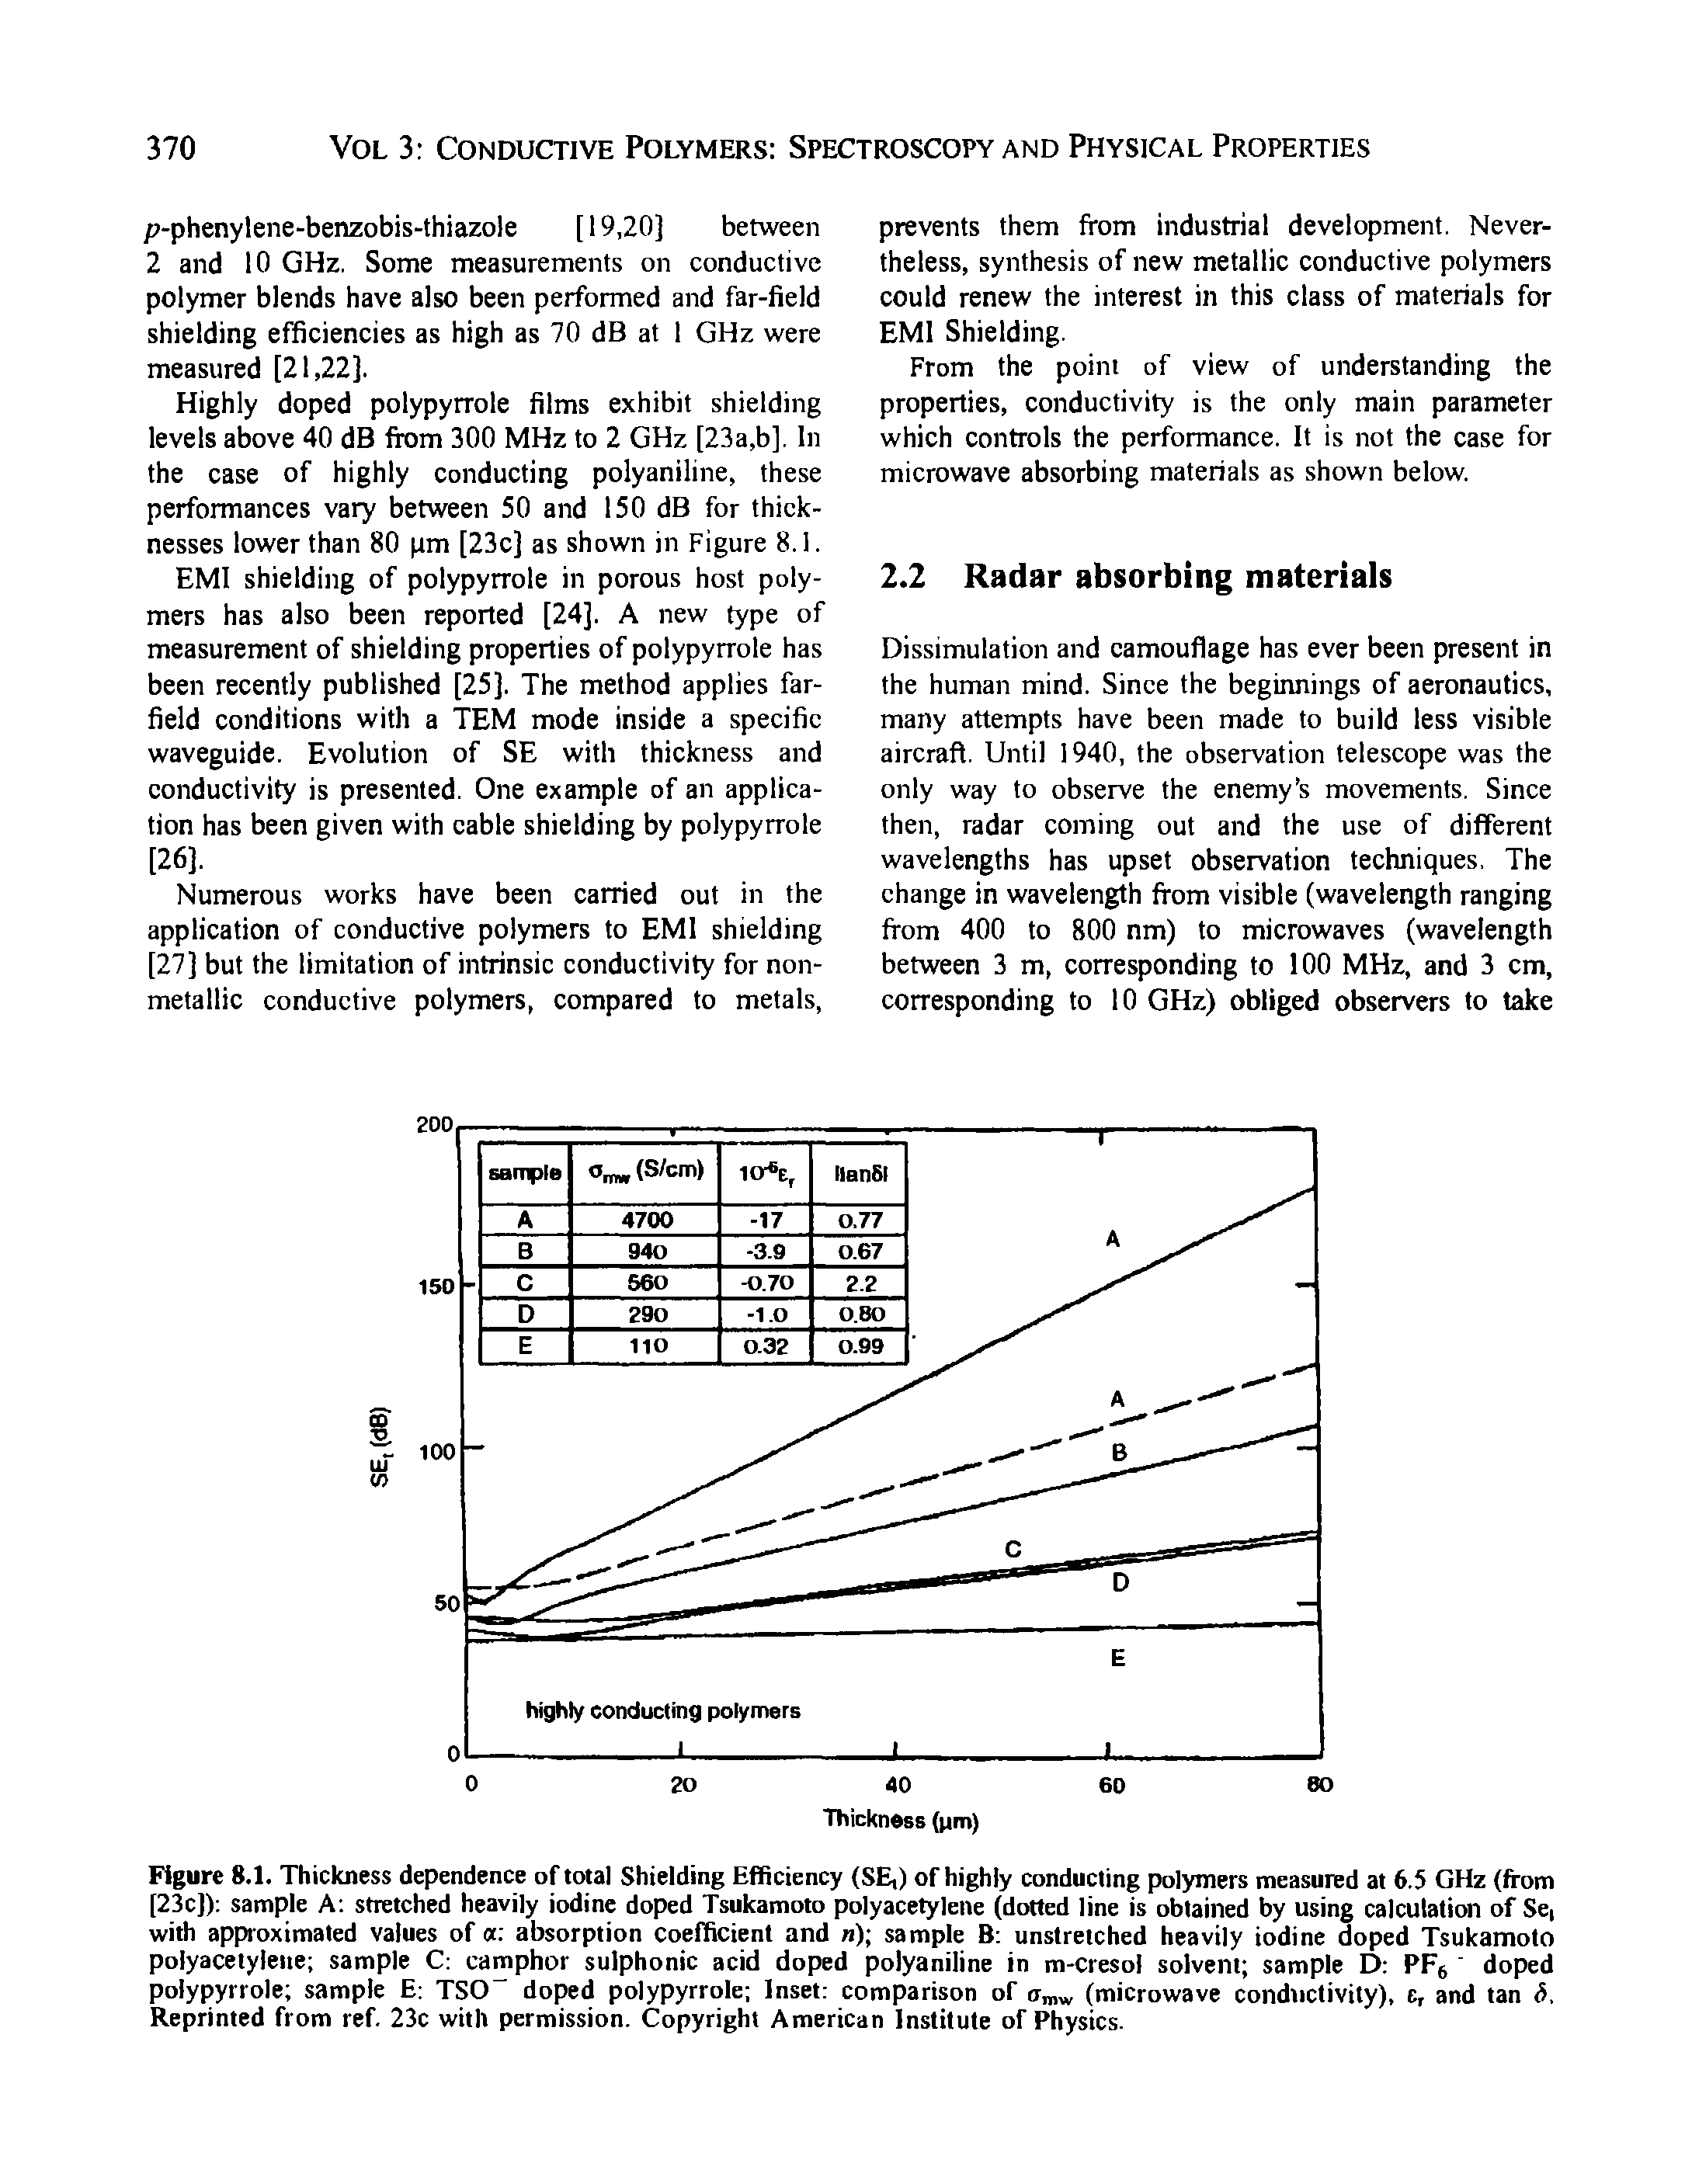 Figure 8.1. Thickness dependence of total Shielding Efficiency (SE,) of highly conducting polymers measured at 6.5 GHz (from [23c]) sample A stretched heavily iodine doped Tsukamoto polyacetylene (dotted line is obtained by using calculation of Se, with approximated values of a absorption coefficient and n) sample B unstretched heavily iodine doped Tsukamoto polyacetylene sample C camphor sulphonic acid doped polyaniline in m-cresol solvent sample D PFe doped polypyrrole sample E TSO doped polypyrrole Inset comparison of (microwave conductivity), c, and tan 6, Reprinted from ref. 23c with permission. Copyright American Institute of Physics.